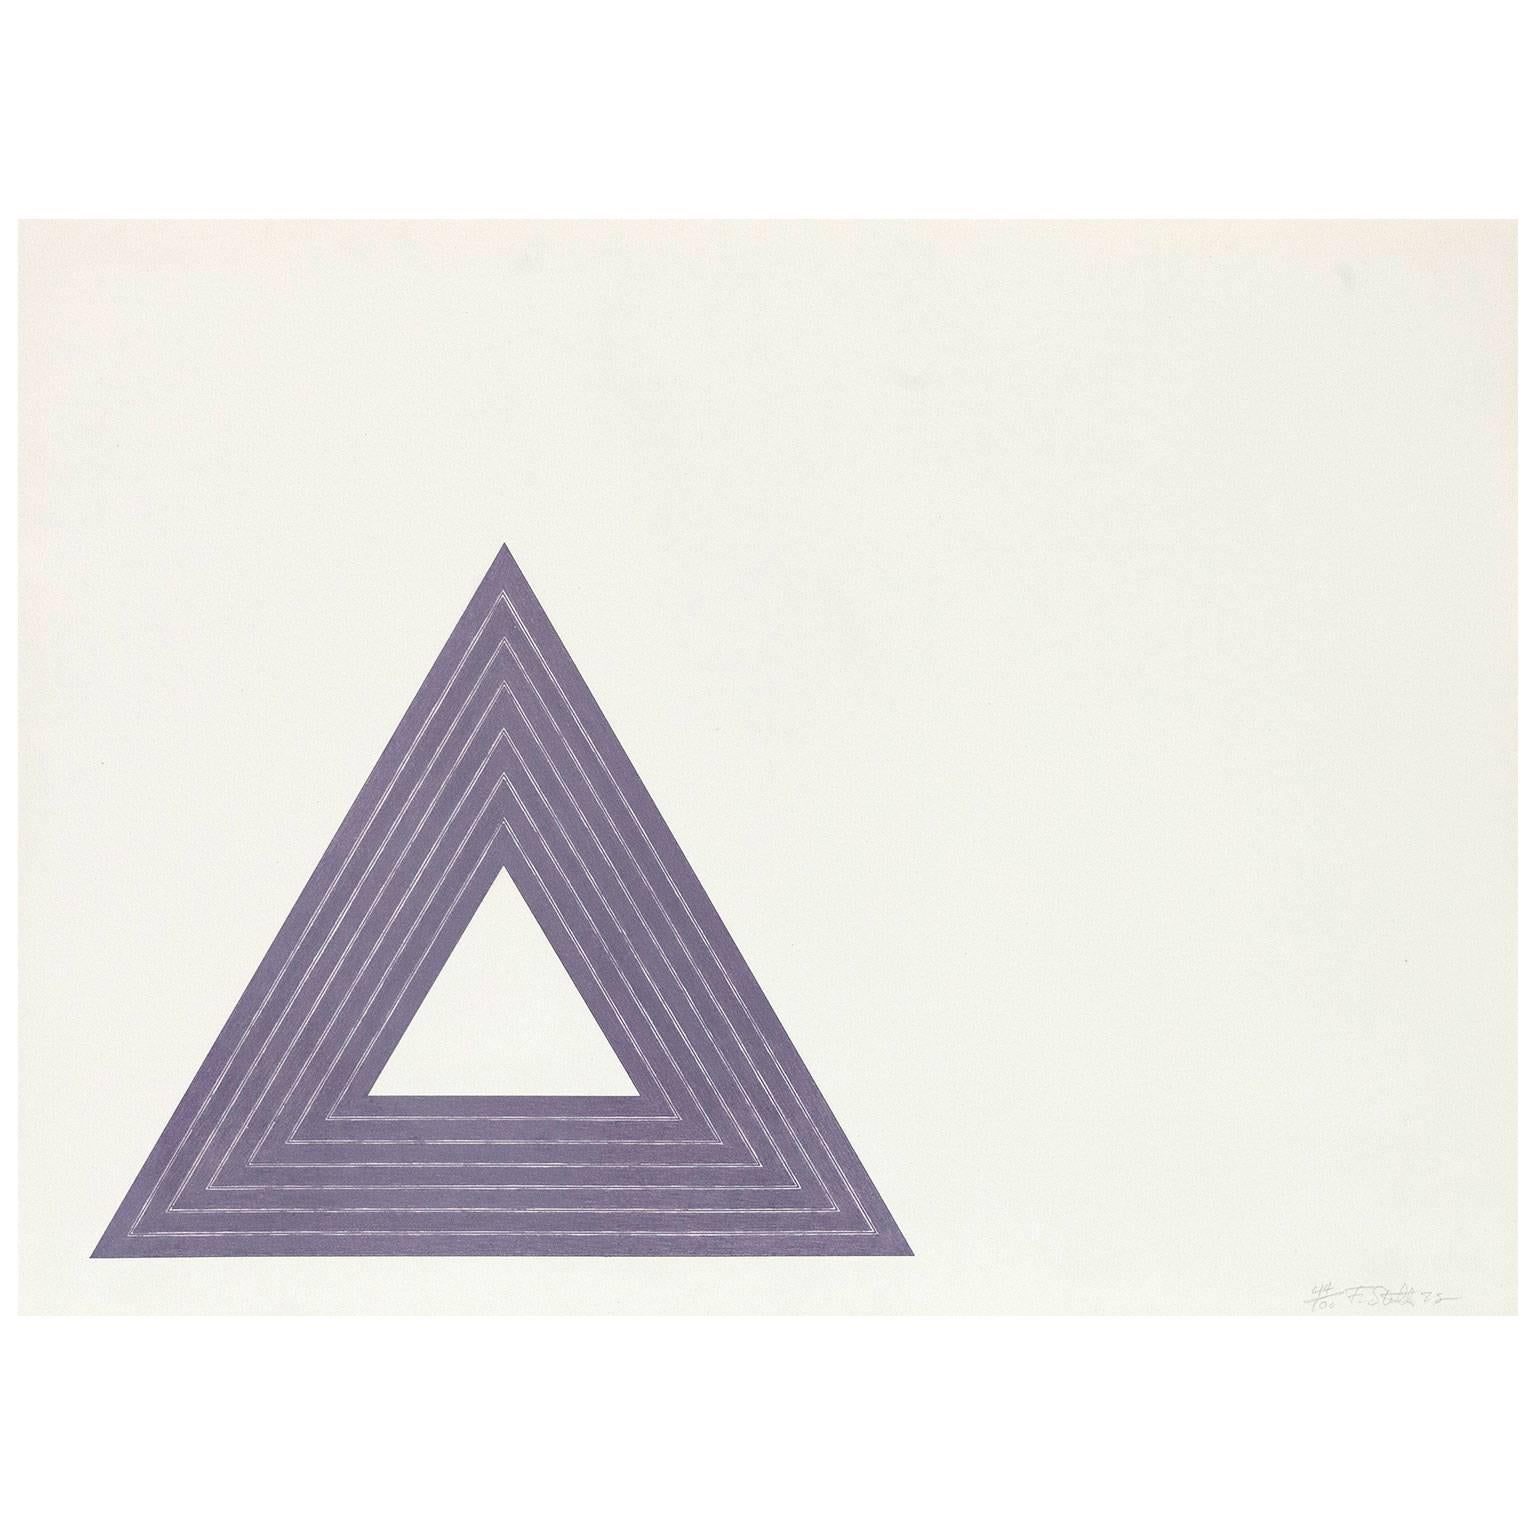 Caviar20 is proud to be offering this exceptional paradigm of Frank Stella's work.

Stella's work references many of the key developments or movements in post-war American painting; geometric abstraction, color field painting and Minimalism.

So it